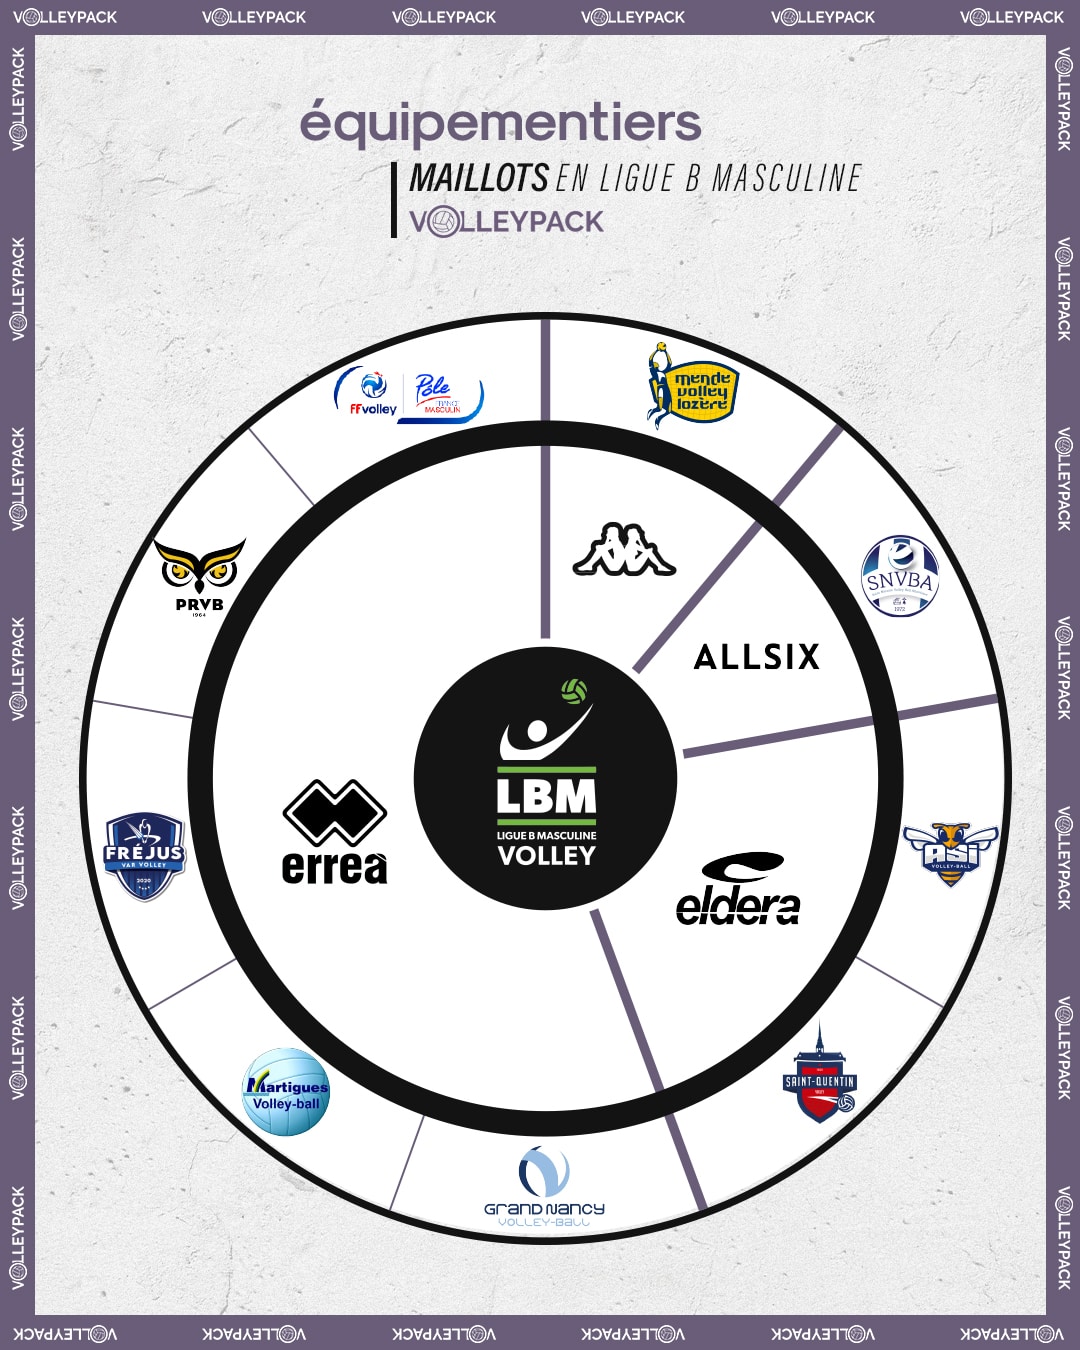 infographie-equipementiers-lnv-LBM-maillots-de-volley-2020-2021